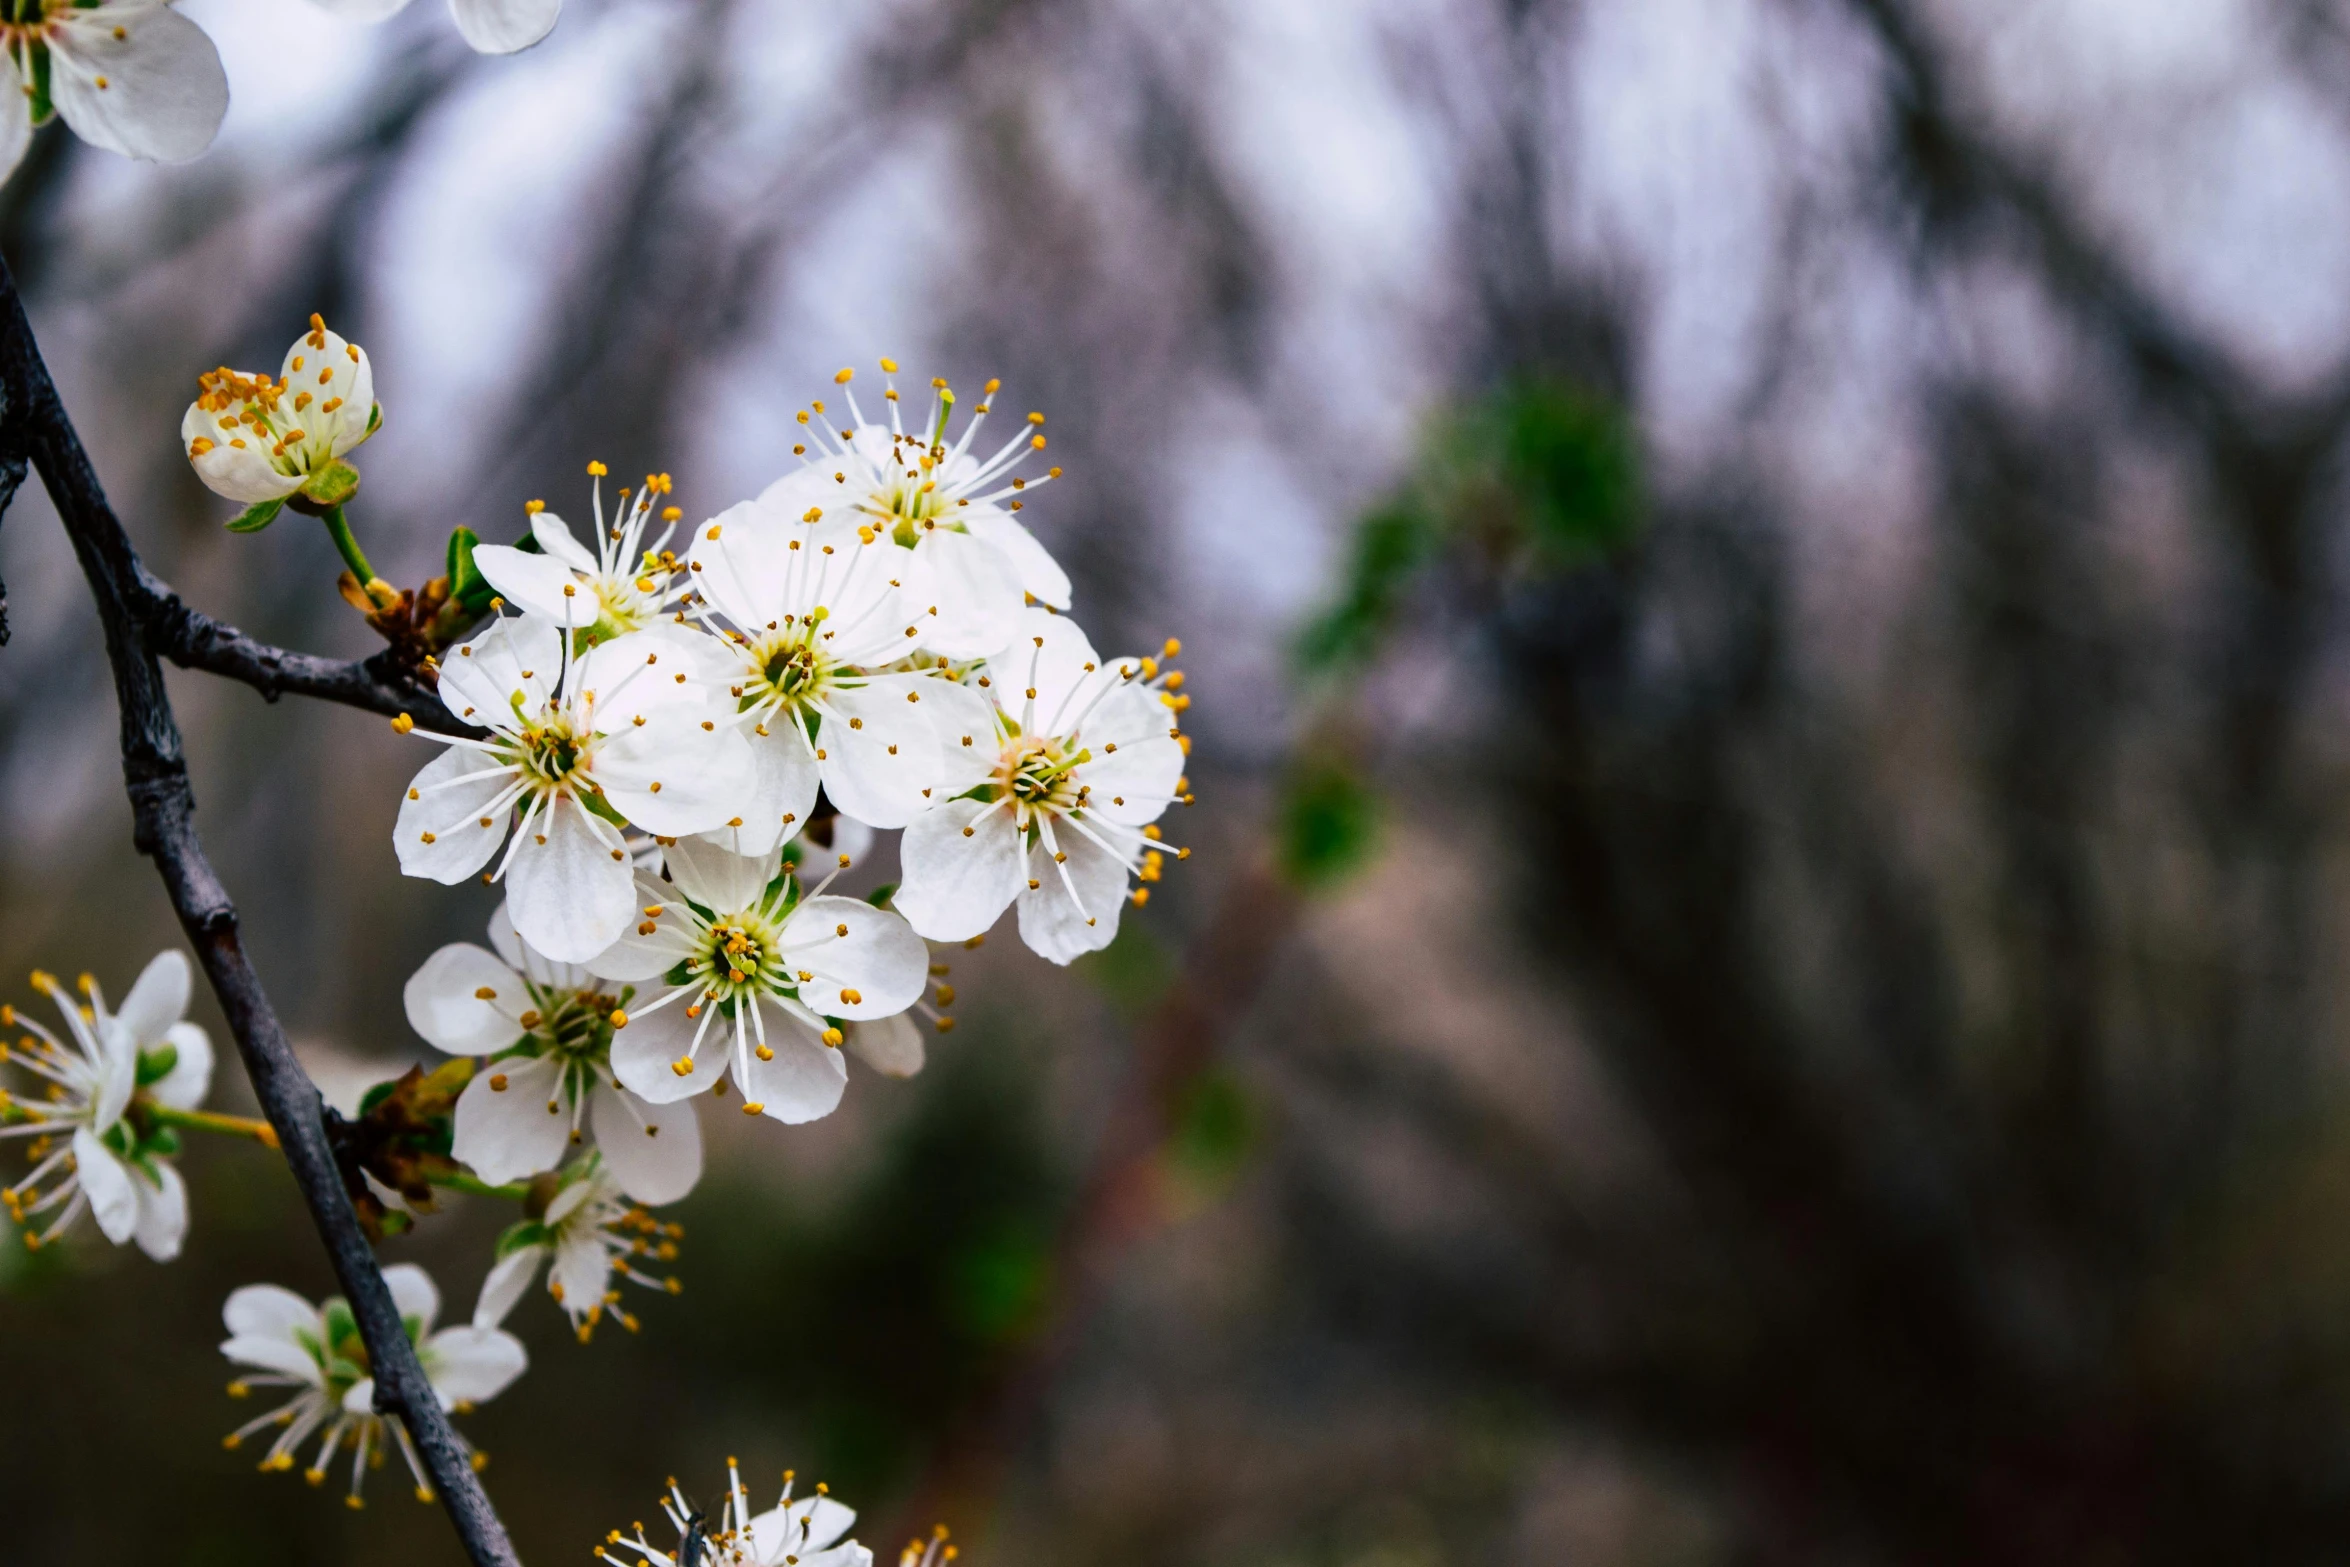 a close up of a white flower on a tree, an album cover, trending on unsplash, background image, plum blossom, paul barson, well focused